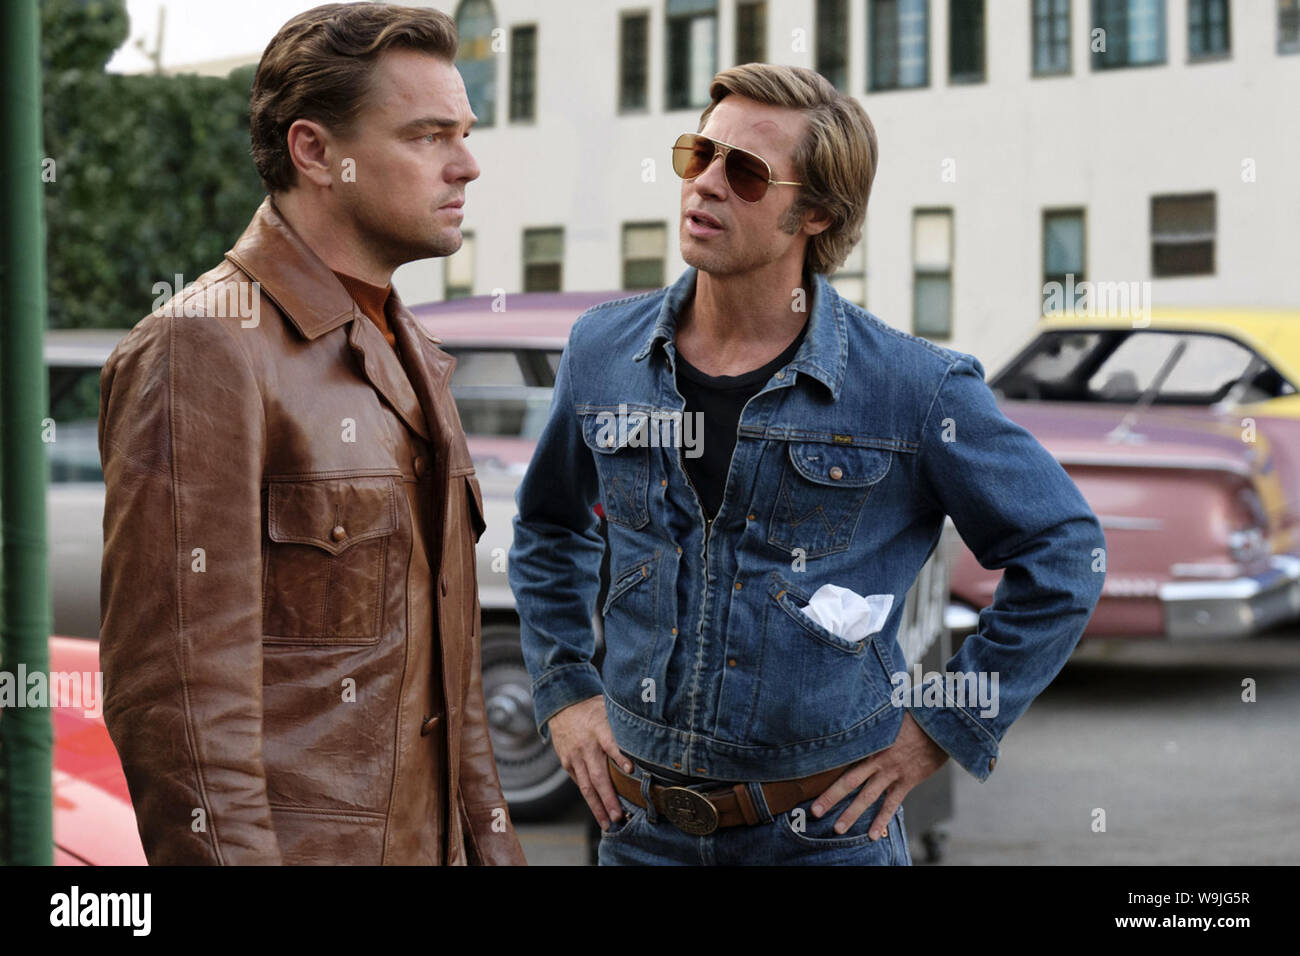 Once Upon a Time in Hollywood is a 2019 comedy-drama crime film written and  directed by Quentin Tarantino. The film stars Leonardo DiCaprio, Brad Pitt,  Margot Robbie, Emile Hirsch, Margaret Qualley, Timothy